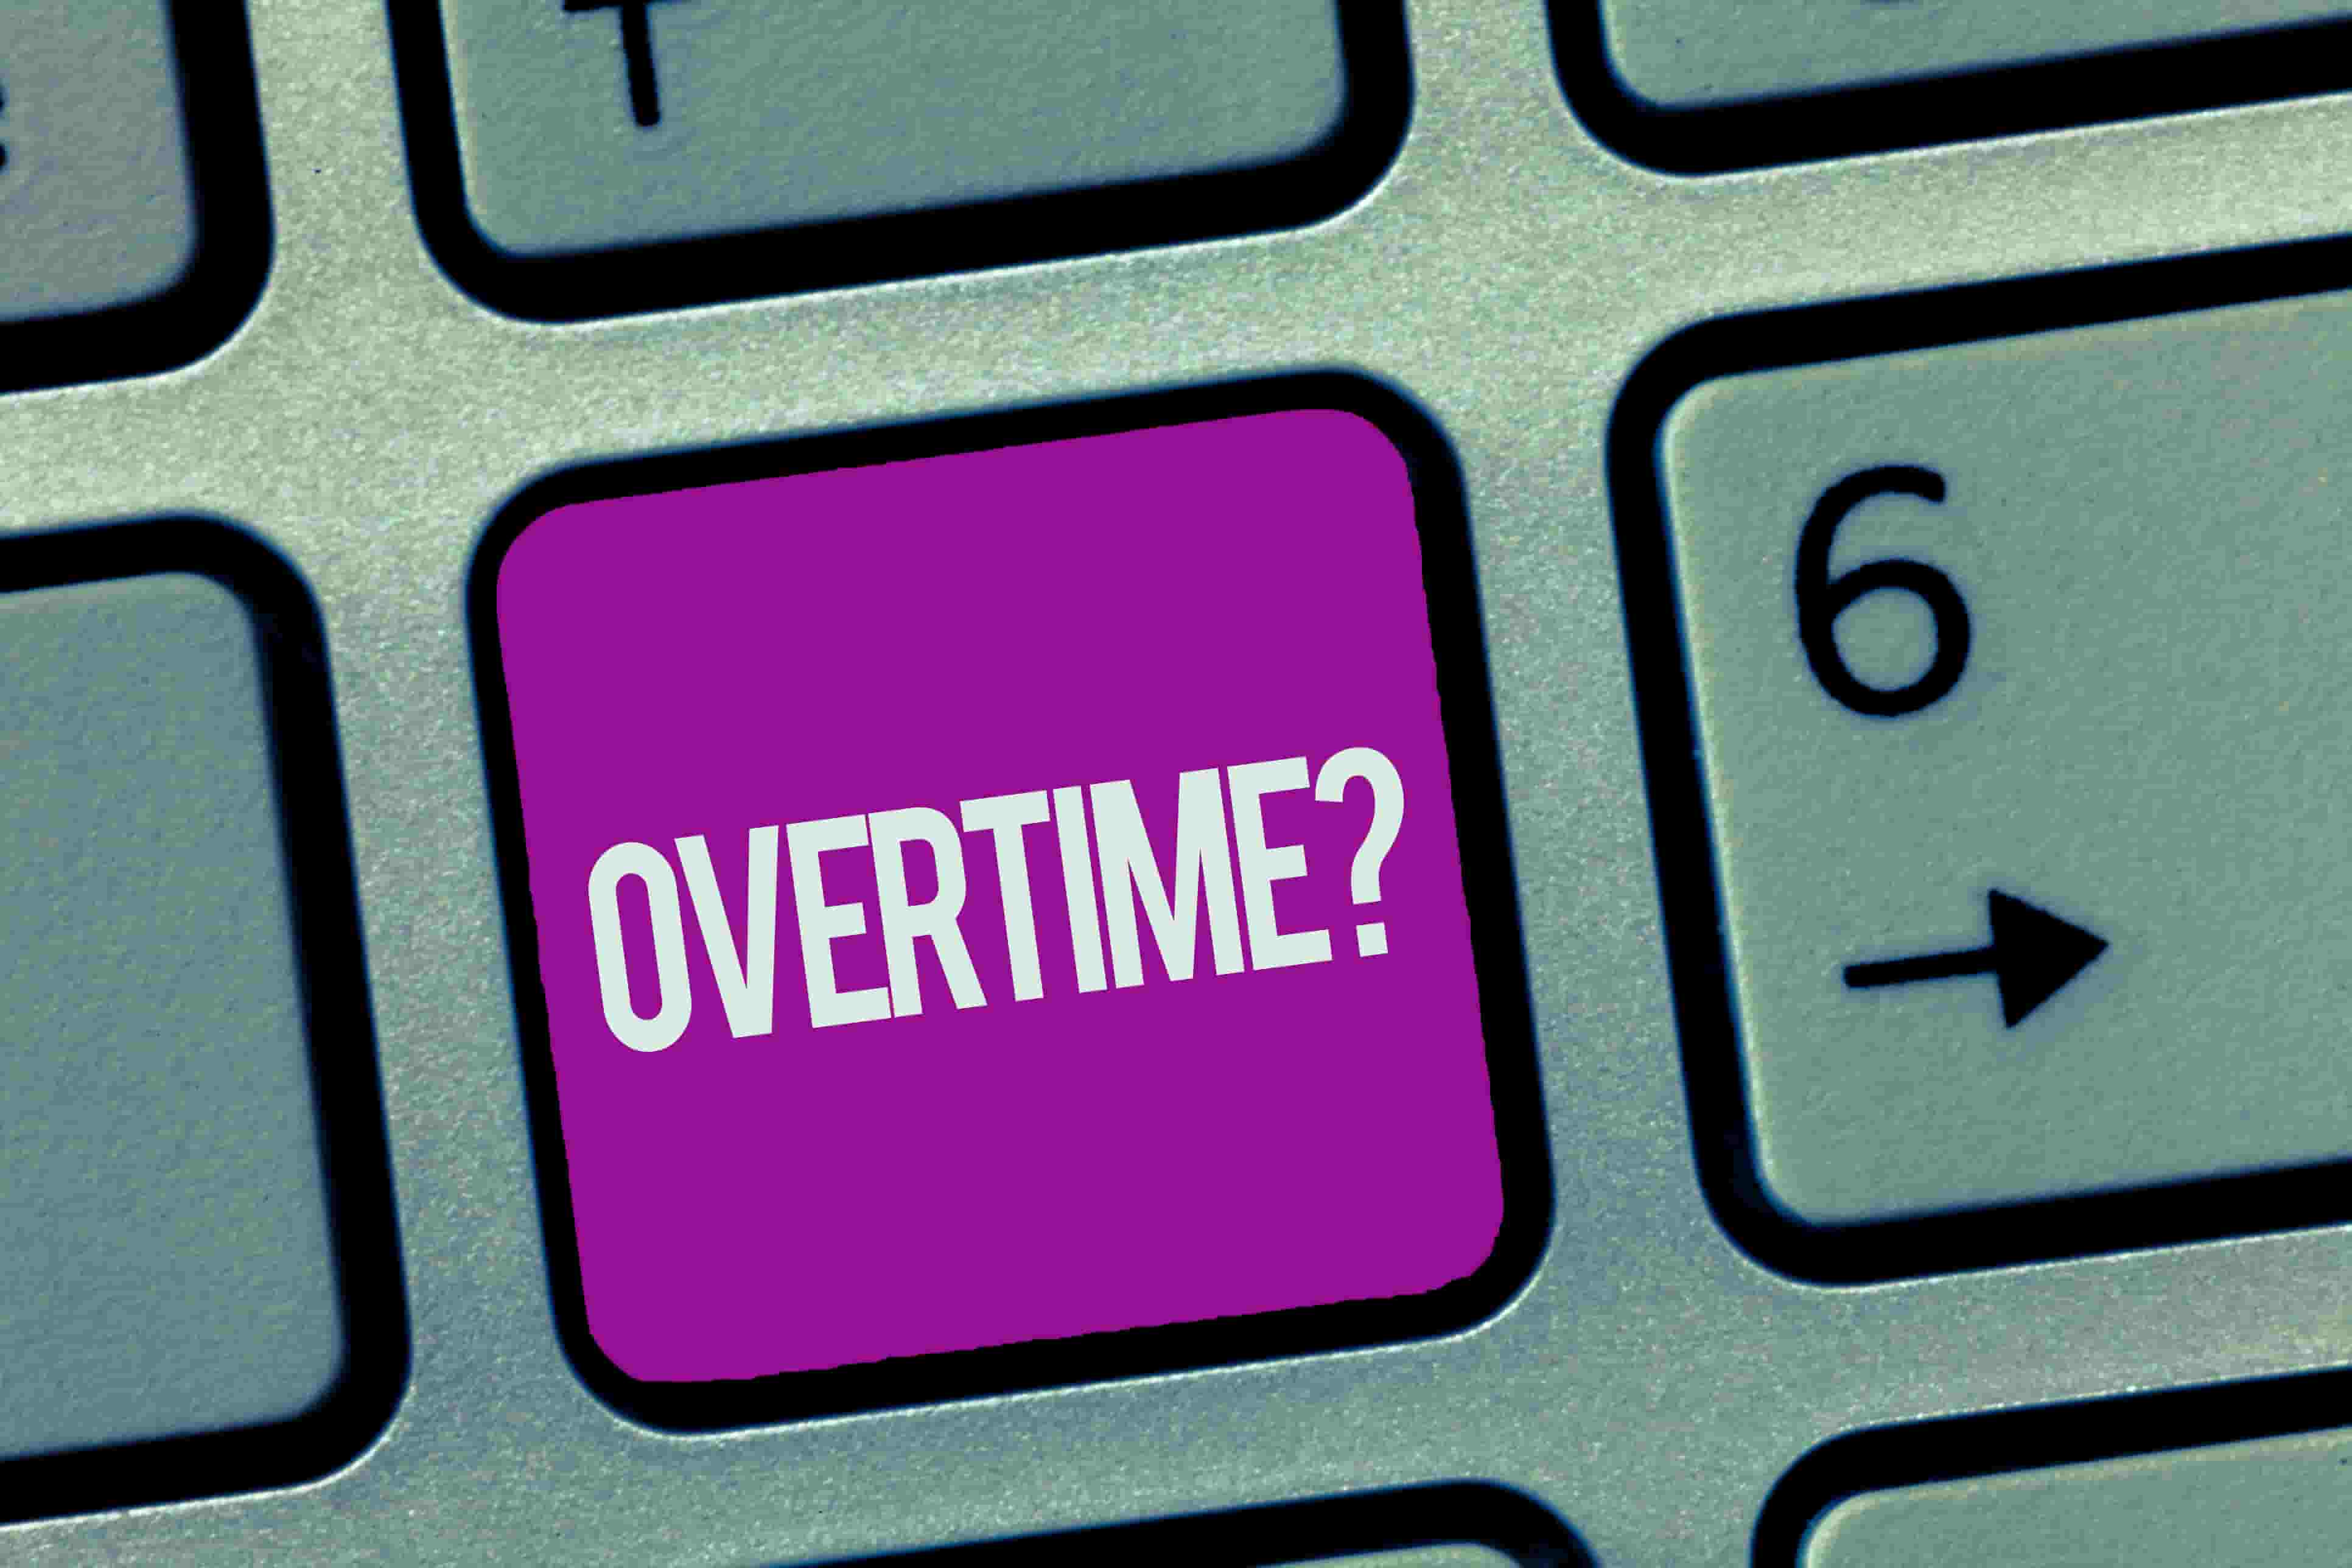 See How Your Organization Can Avoid an Overtime Pay Mistake